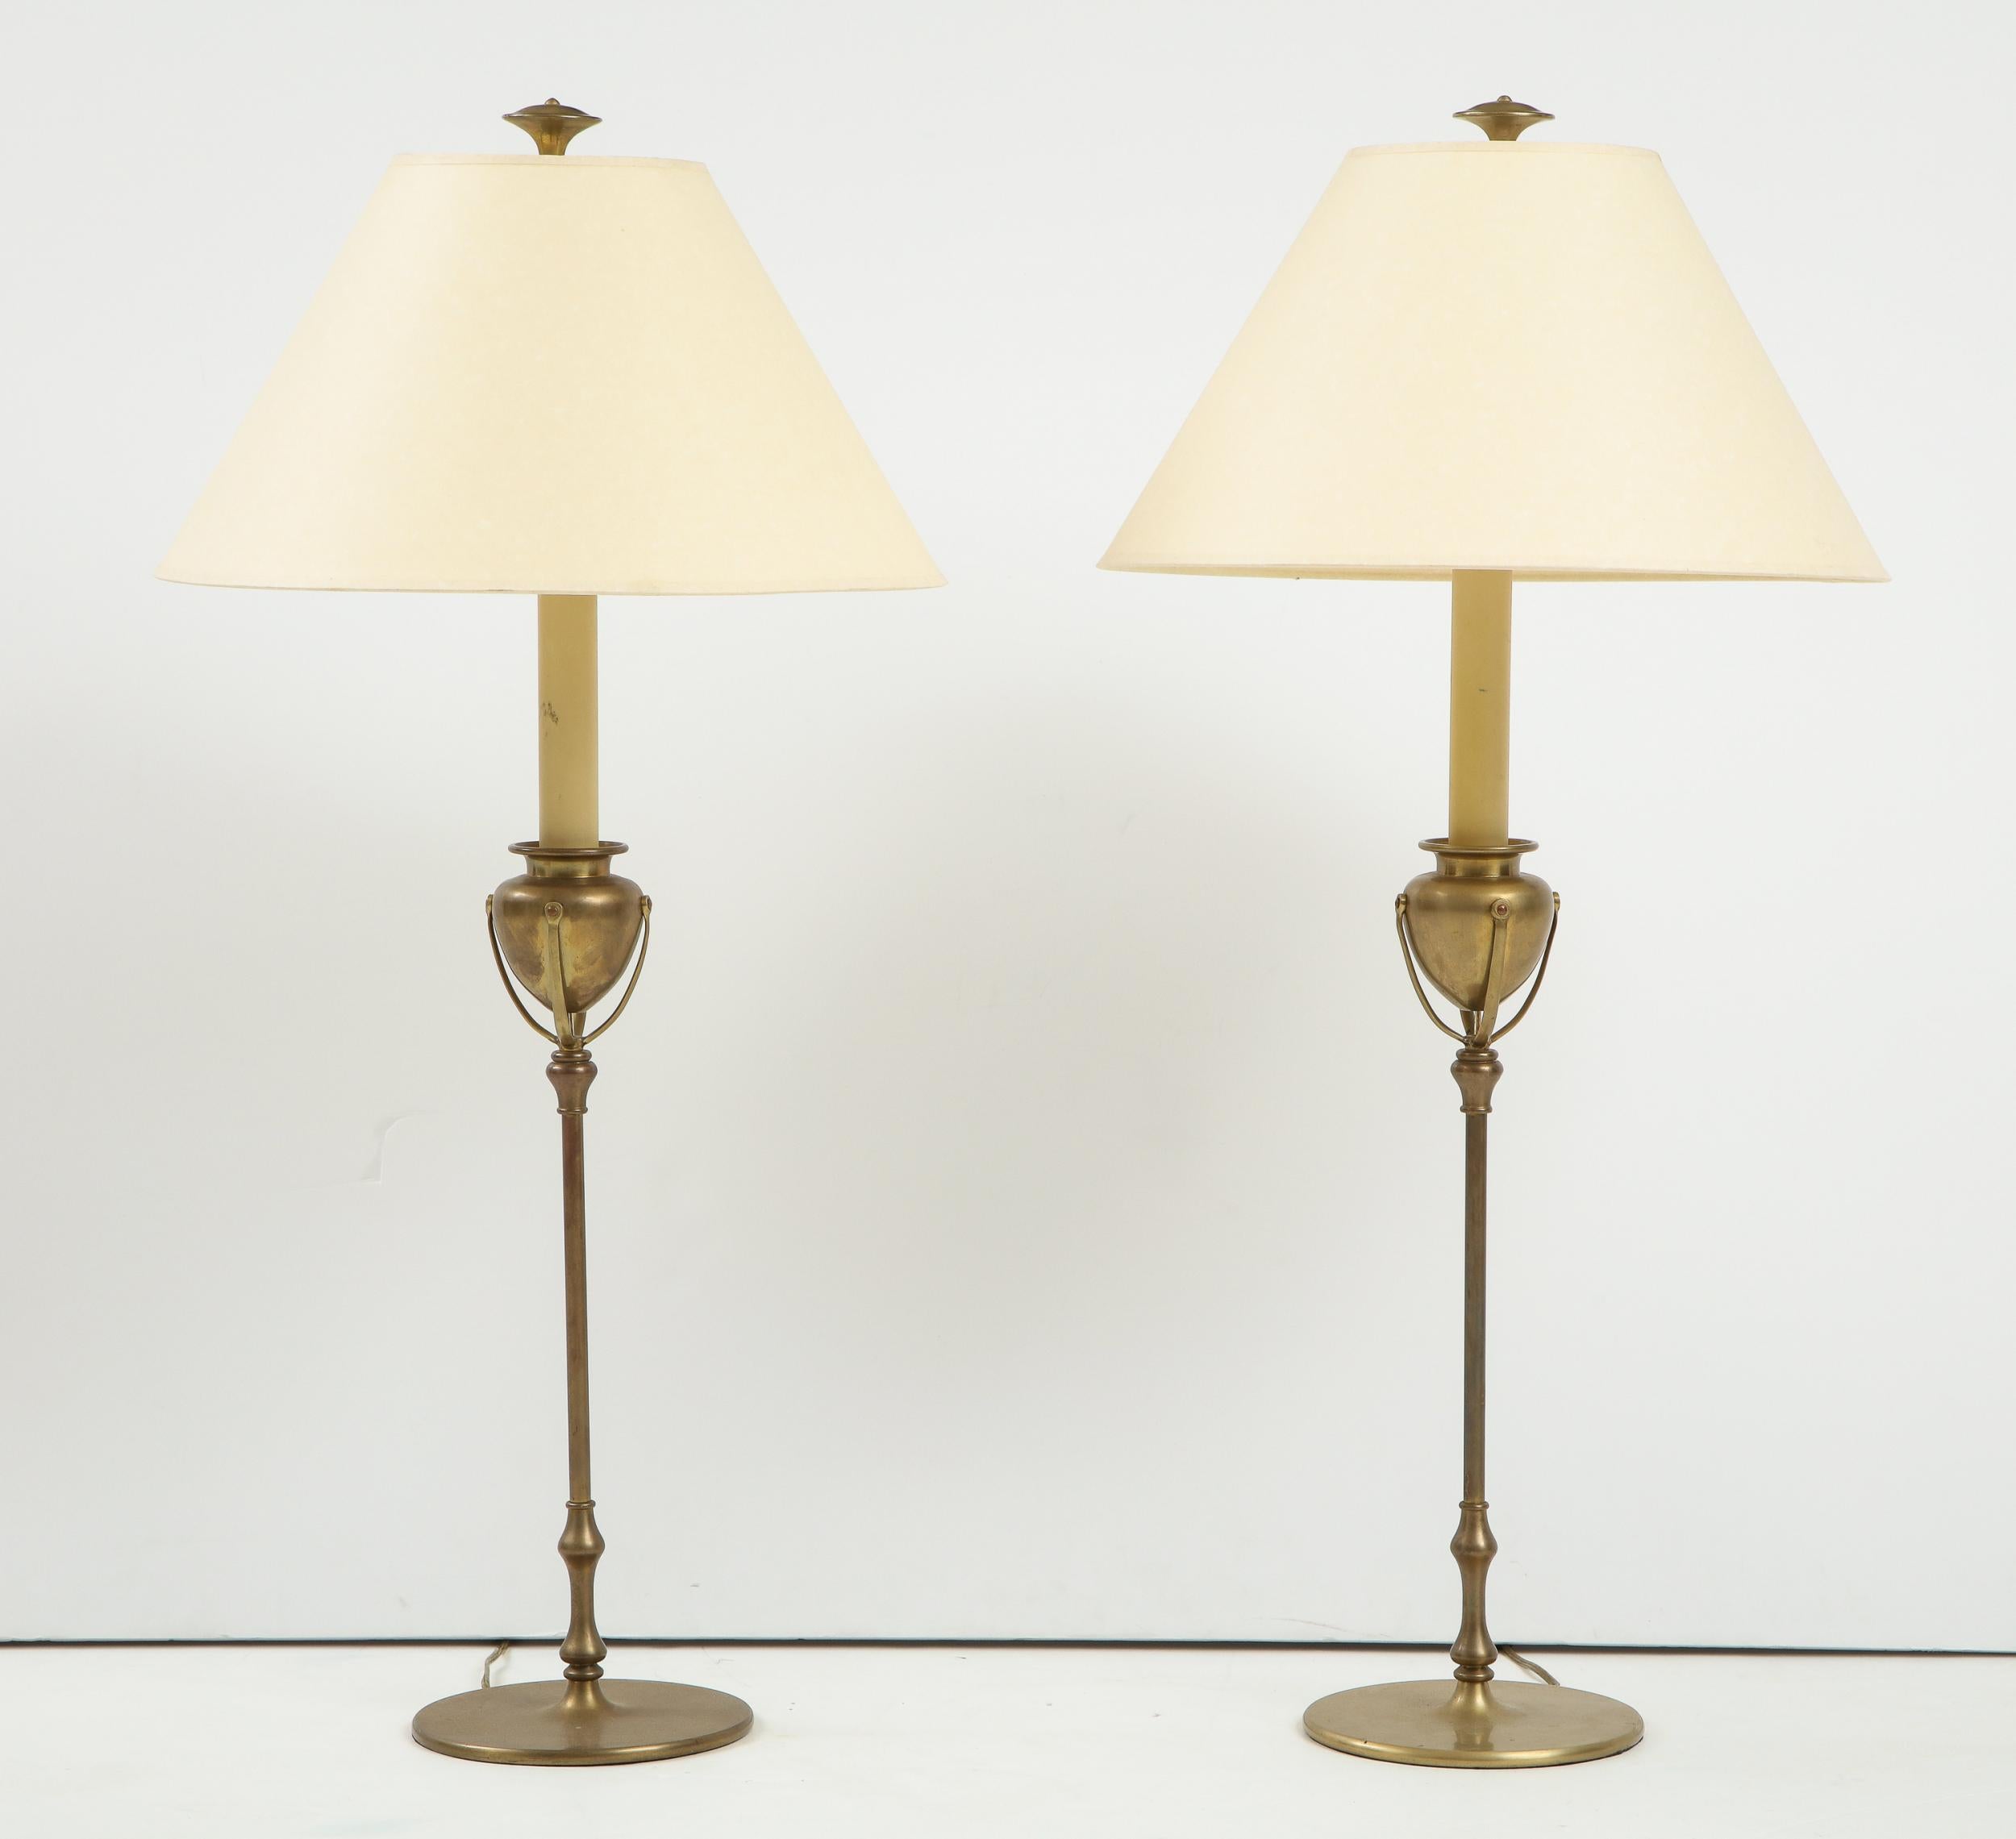 Unusual pair of 1970's bronze lamps, clearly inspired by the Tiffany Studios bronze candlestick, but with more streamlined design.

Height below is to finial, diameter is of base.